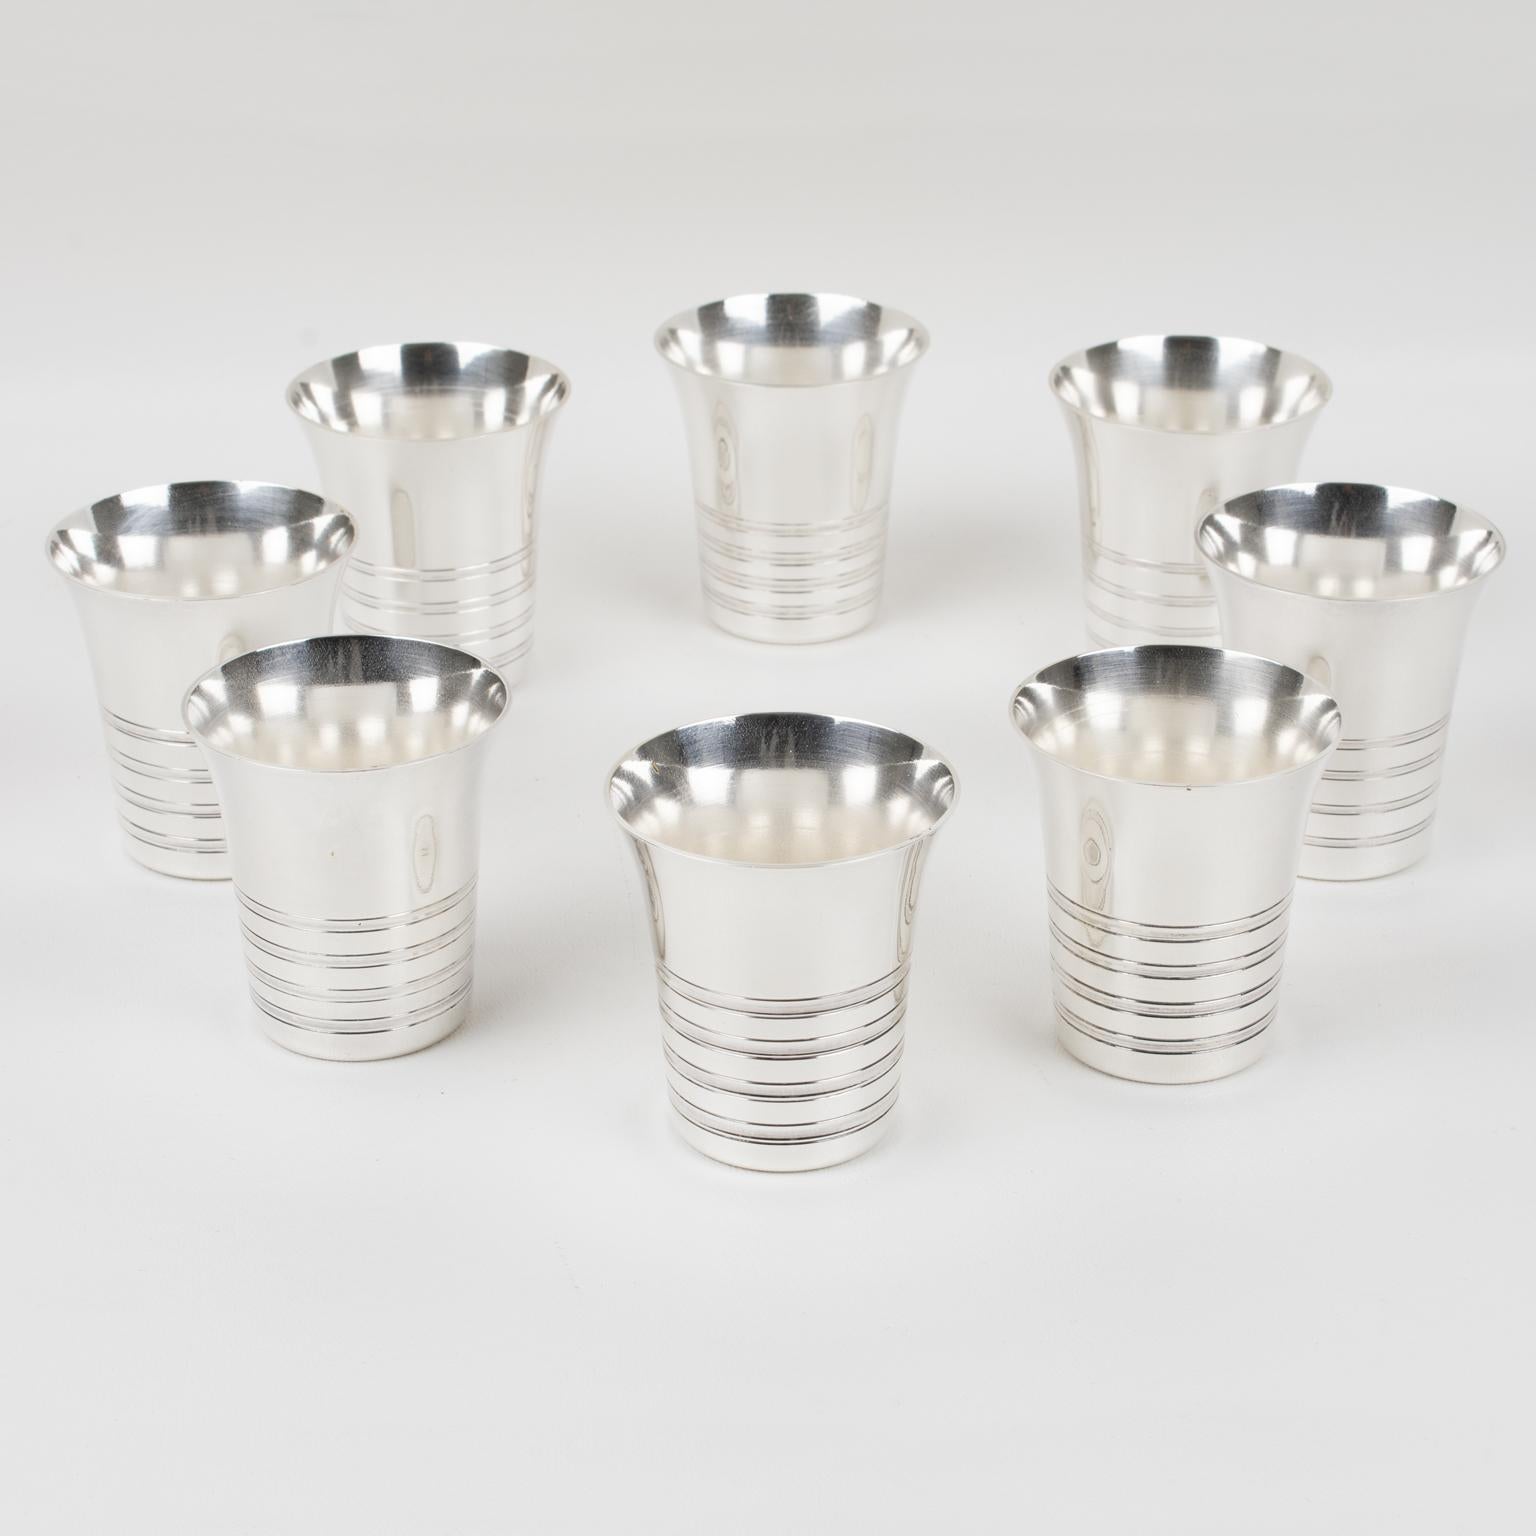 Art Deco Silver Plate Cocktail Shaker and Eight Barware Glasses, France 1940s For Sale 5